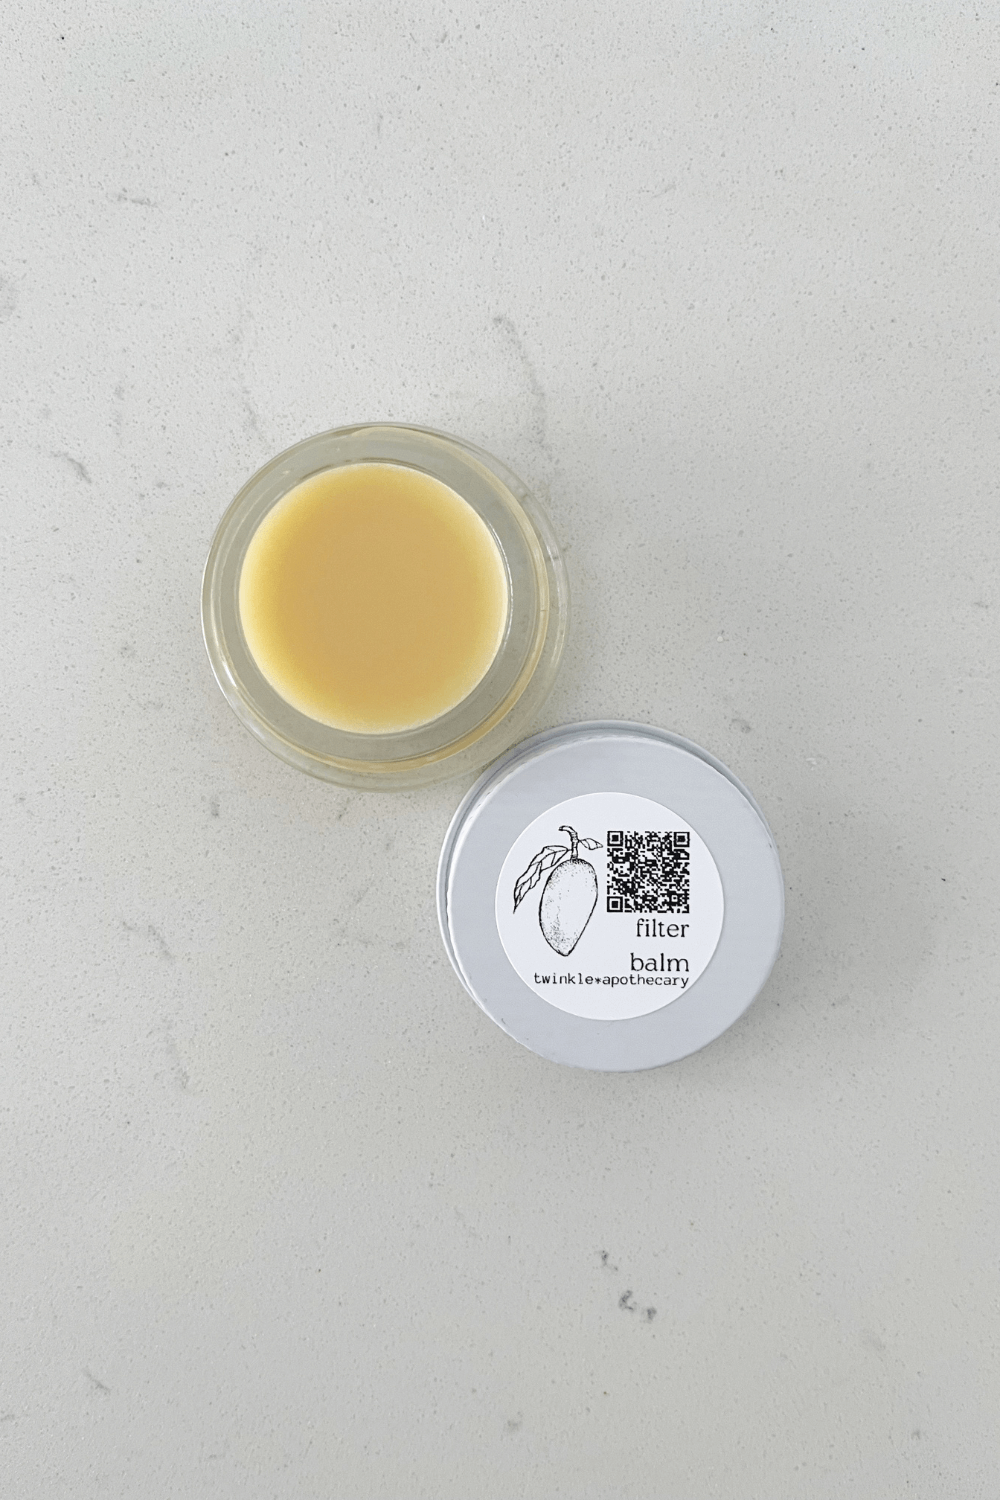 sample jar of twinkle apothecary filter balm: makeup and moisturizer hybrid skincare 